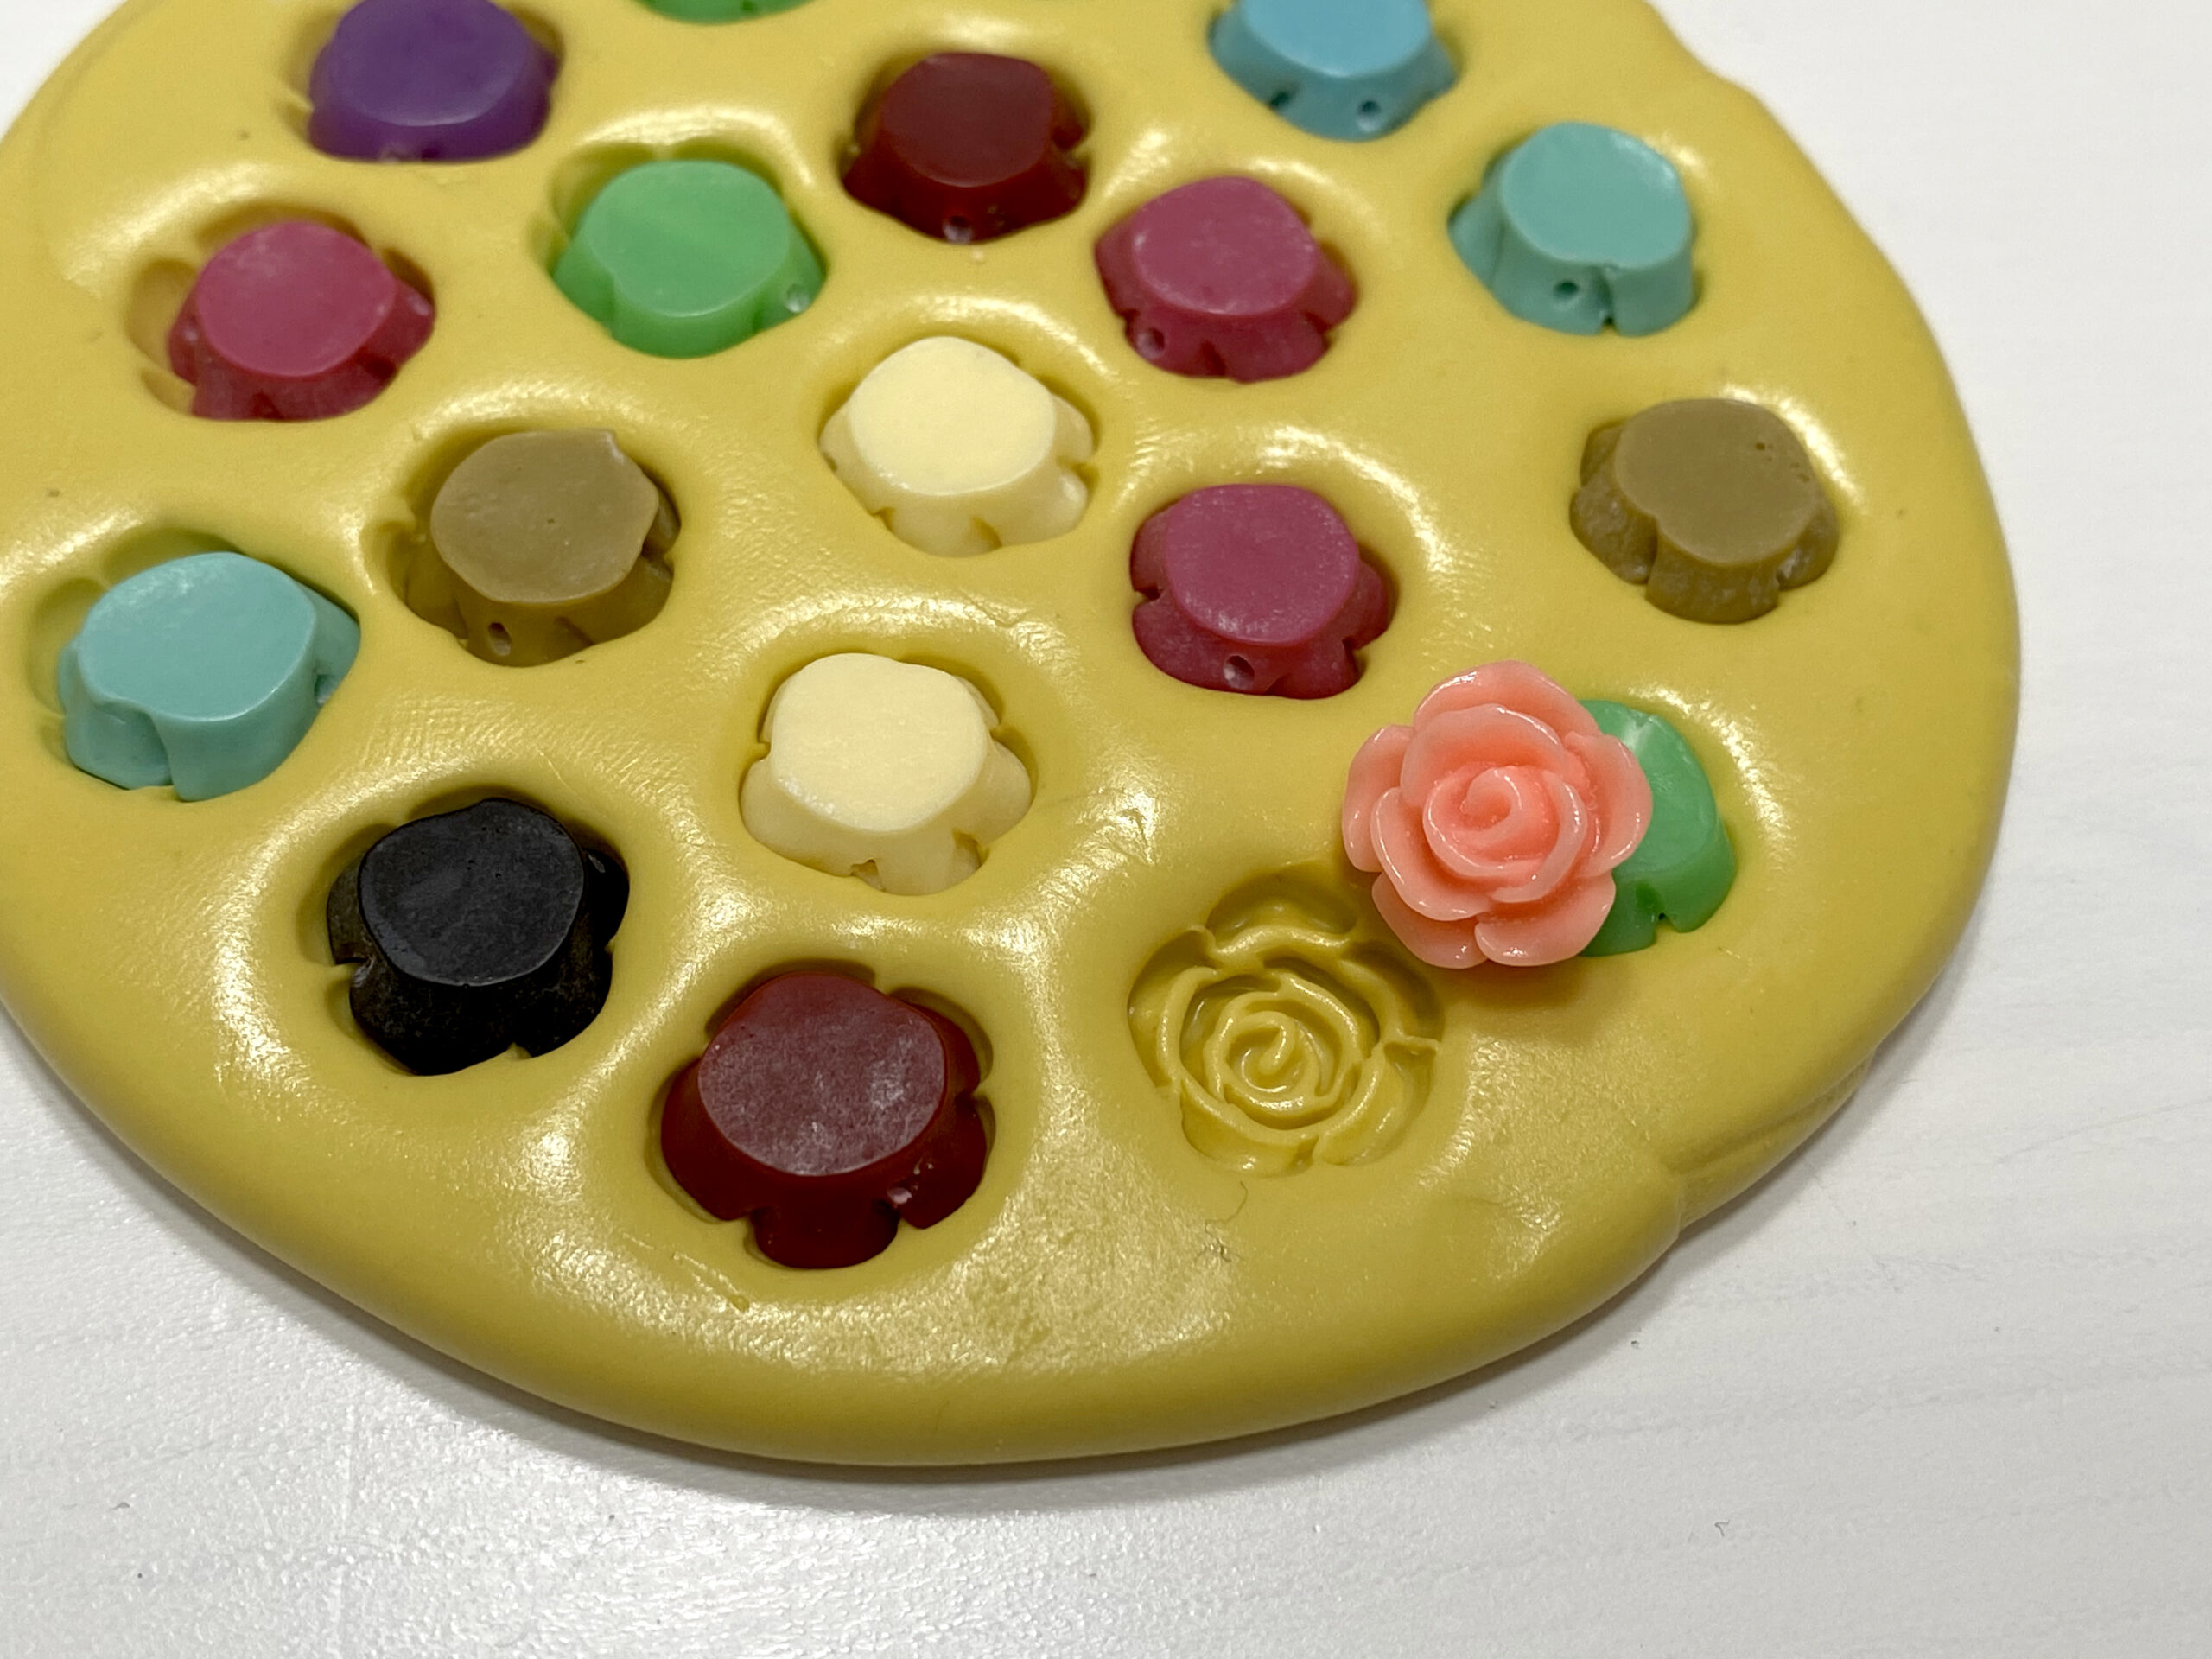 How to Make a Silicone Mold for Cosmetic Sprinkles